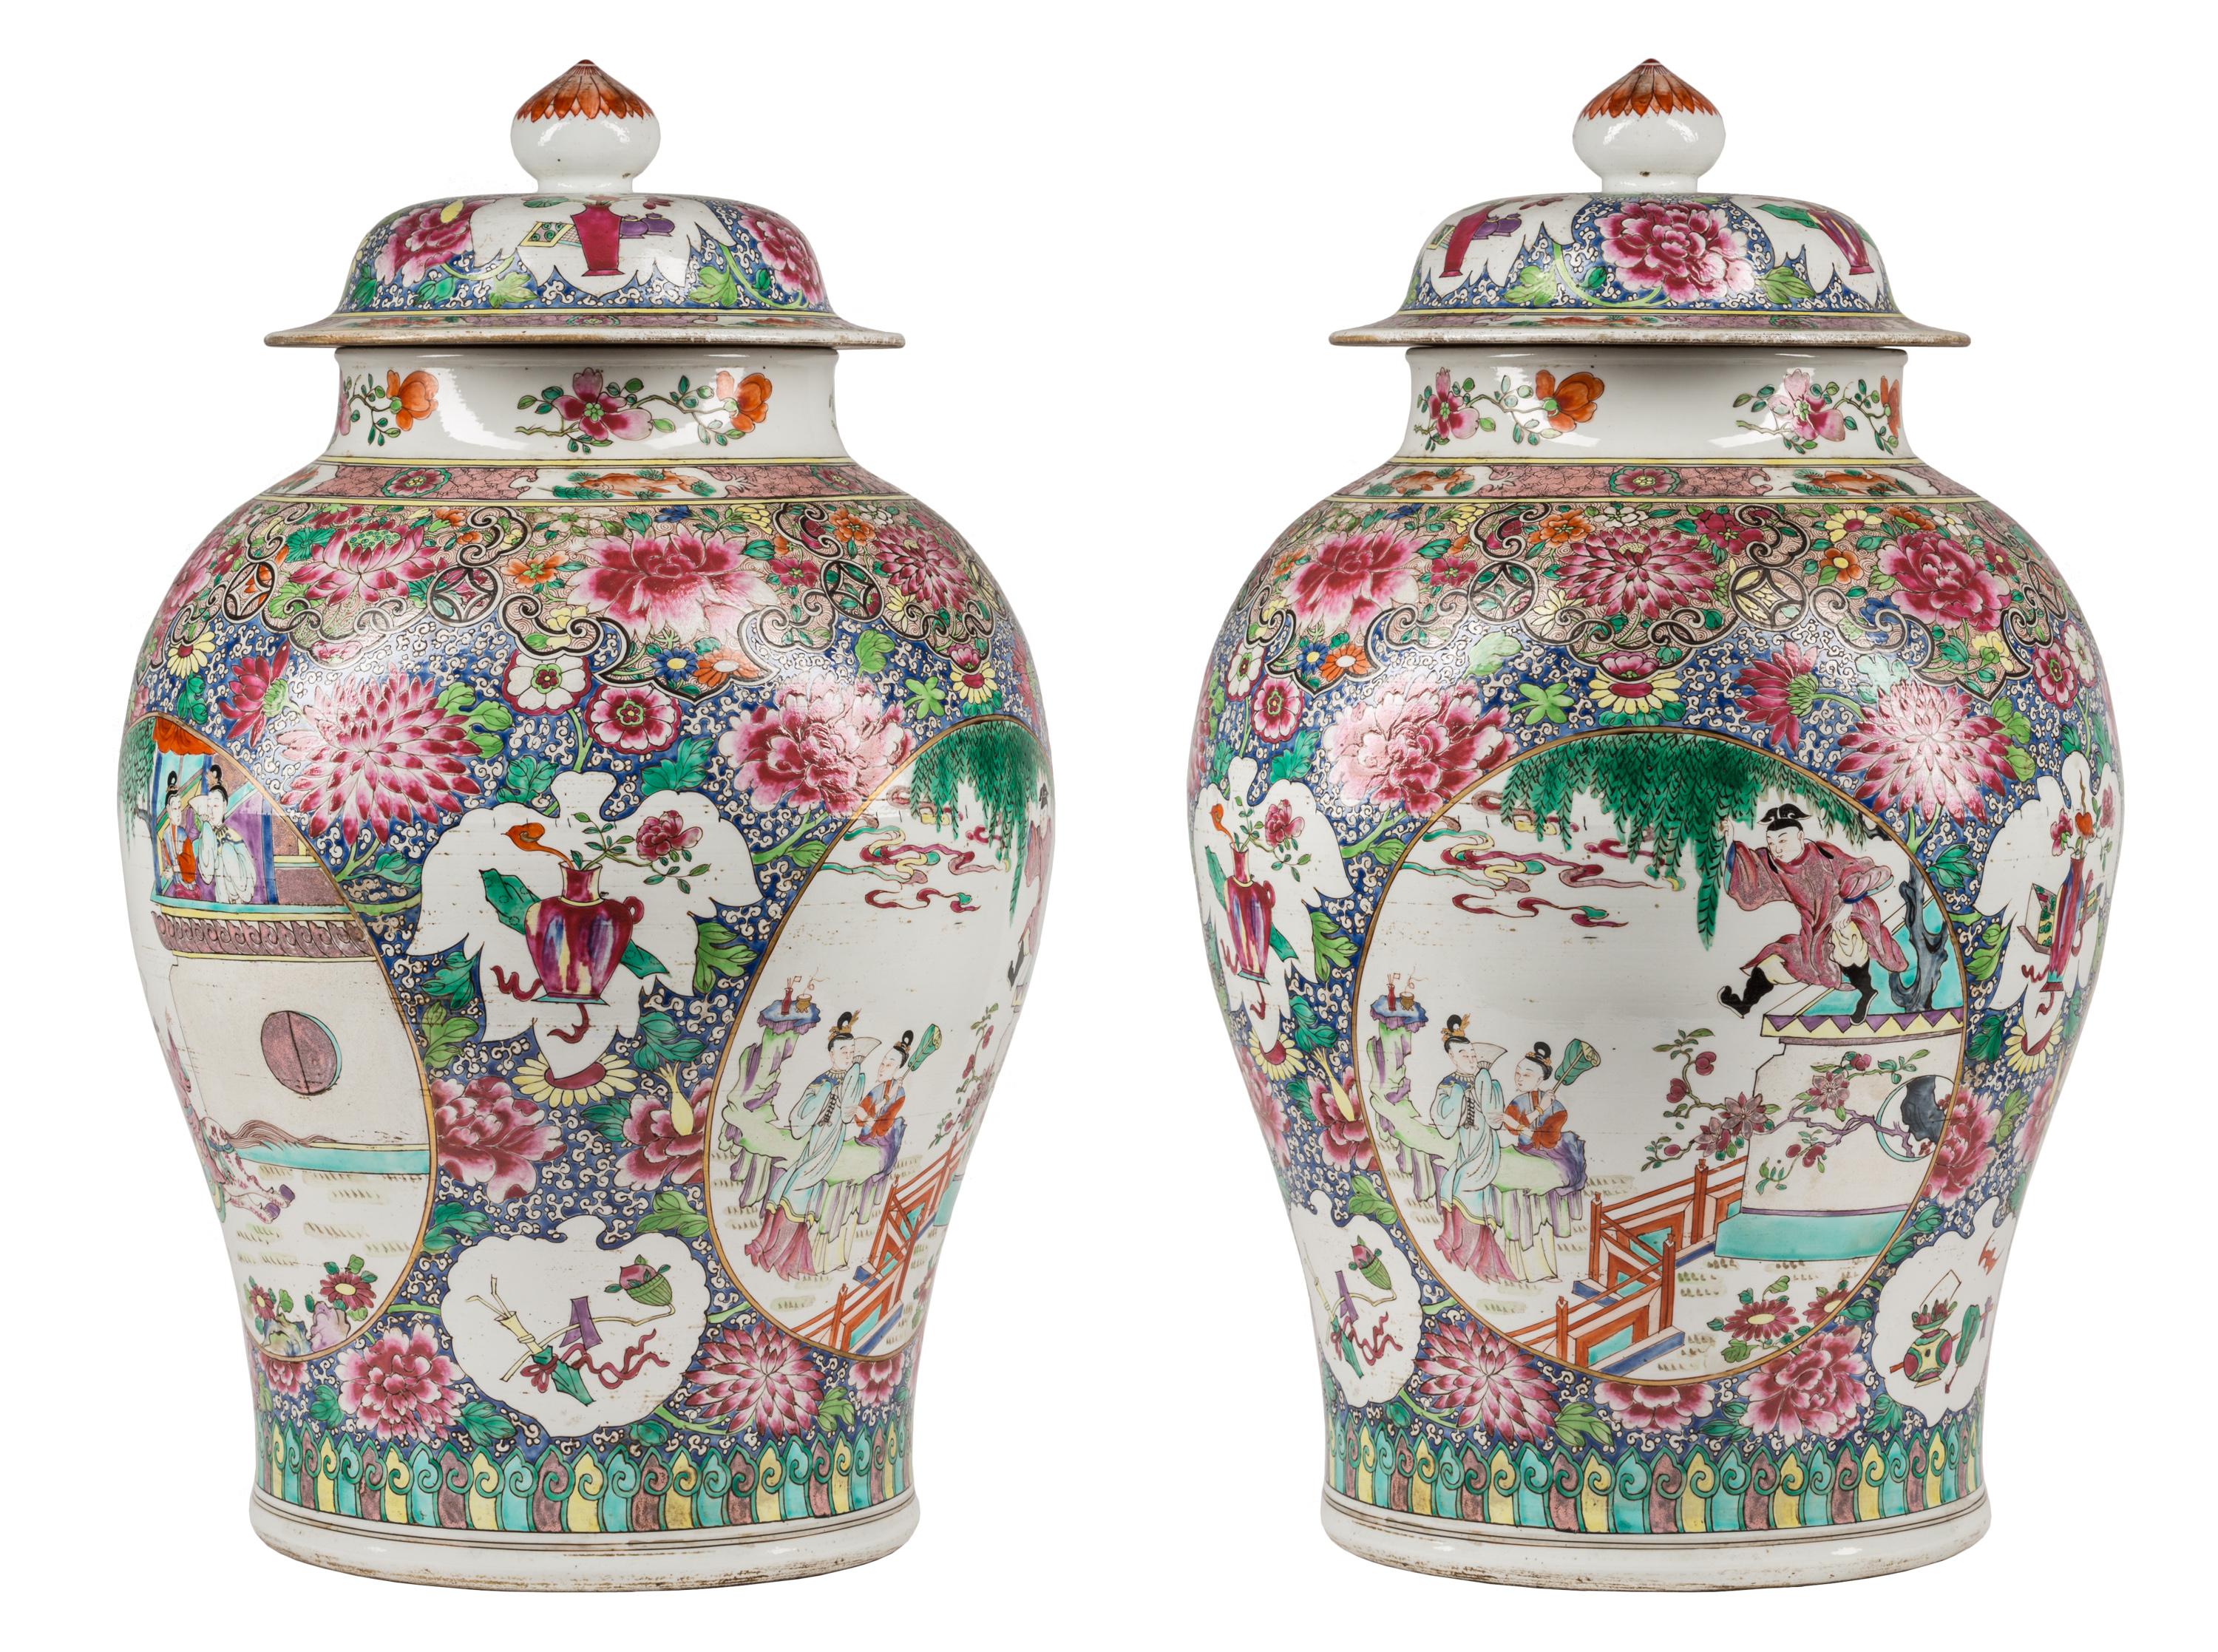 A matched pair of 19th century porcelain urns with lids, made by Samson Edmé et Cie porcelain, of Paris. Samson opened in 1845 and soon became well-known for making reproductions of ceramic pieces on display in museums and private collections.